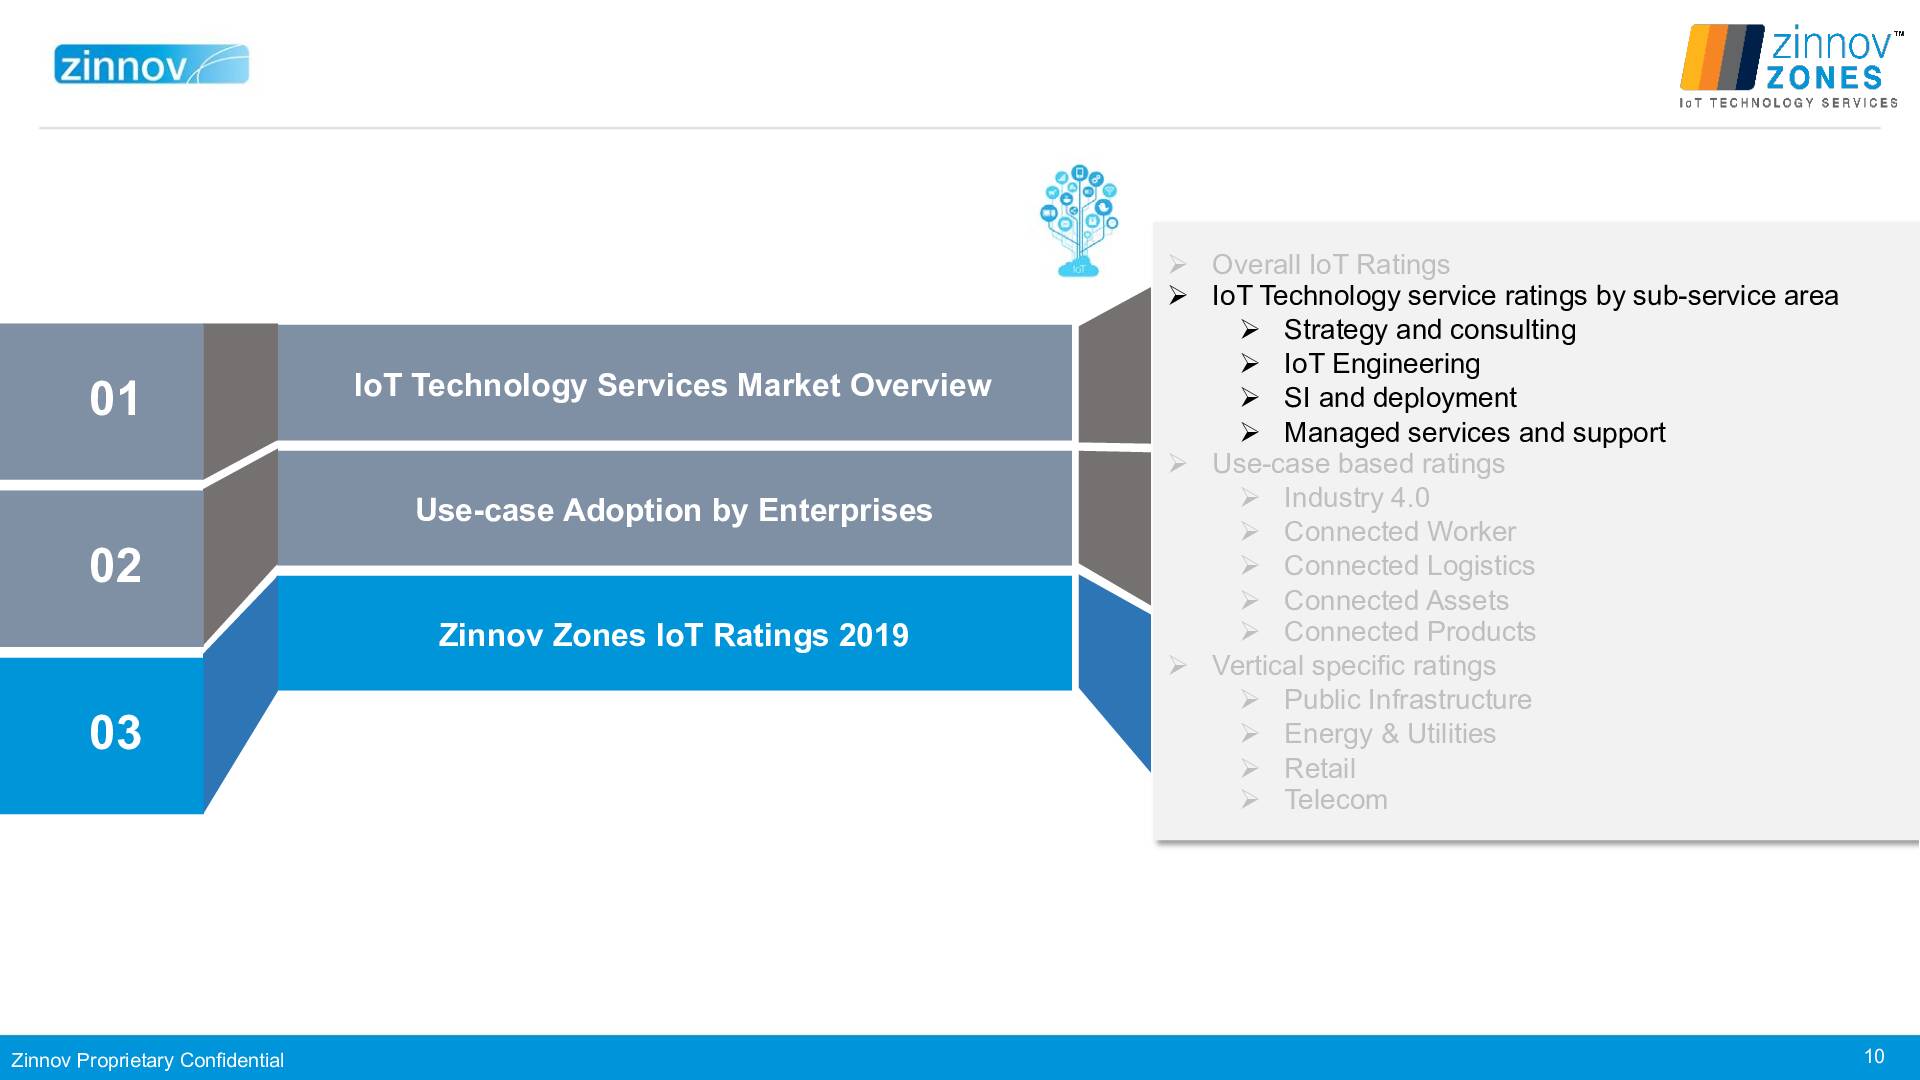 Zinnov Zones Iot Technology Services 2019 Ratings10